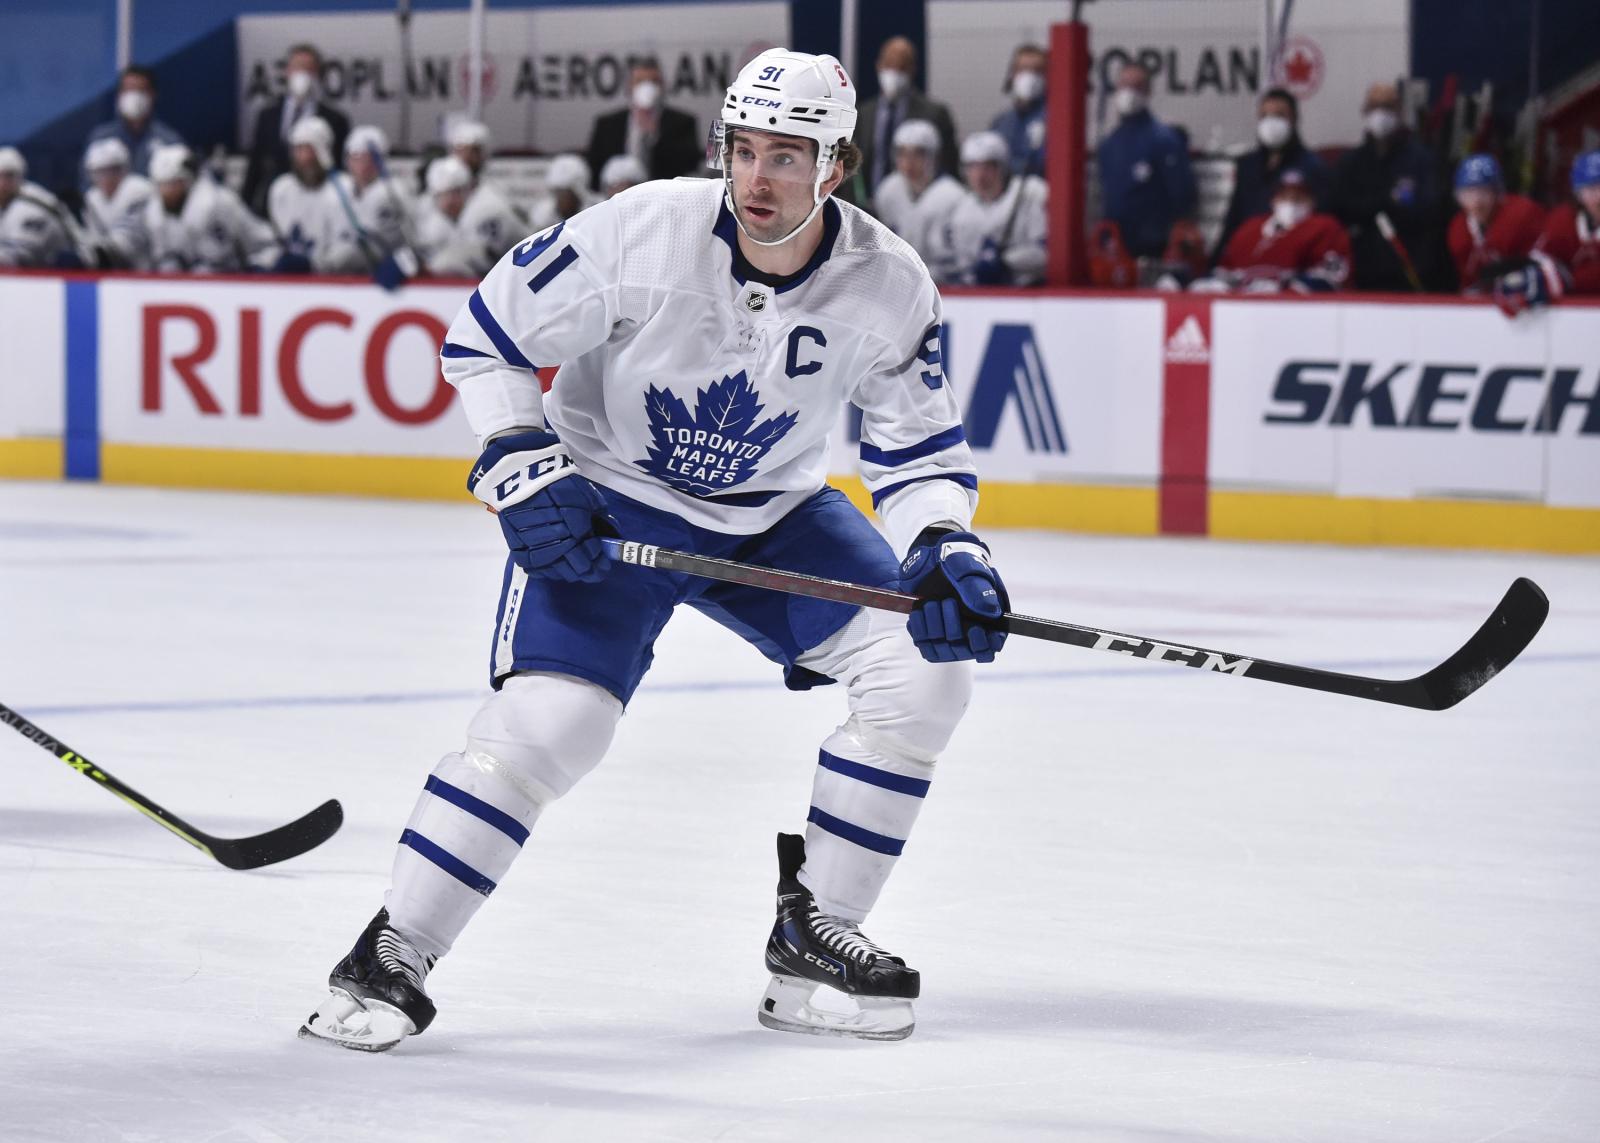 John Tavares on the road back to Maple Leafs after devastating